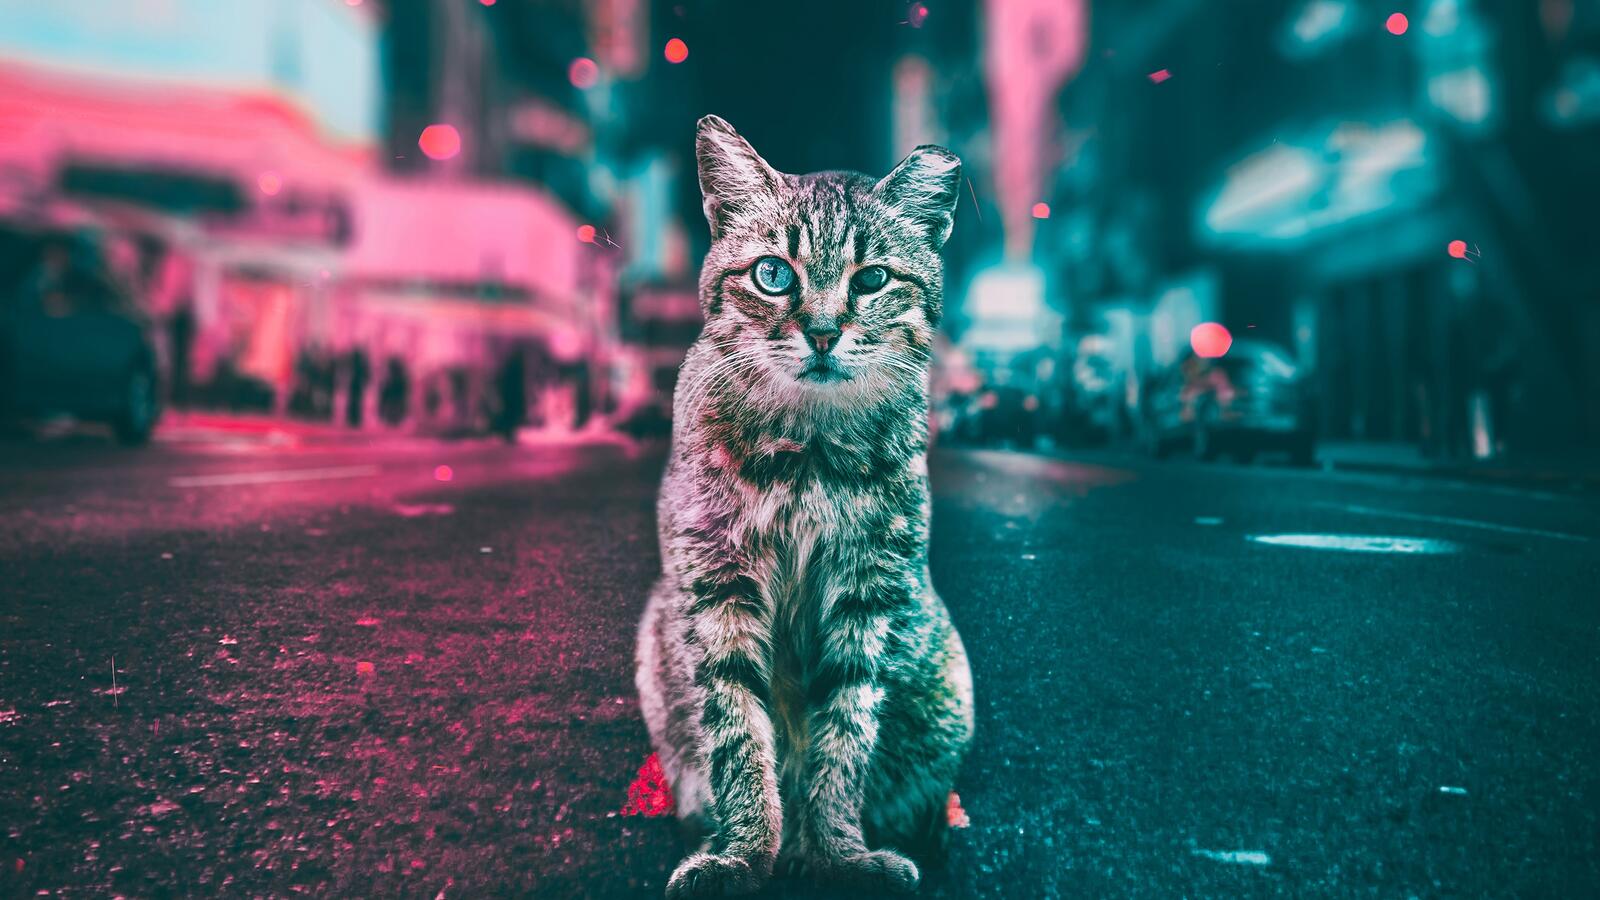 Wallpapers cat streets cats on the desktop